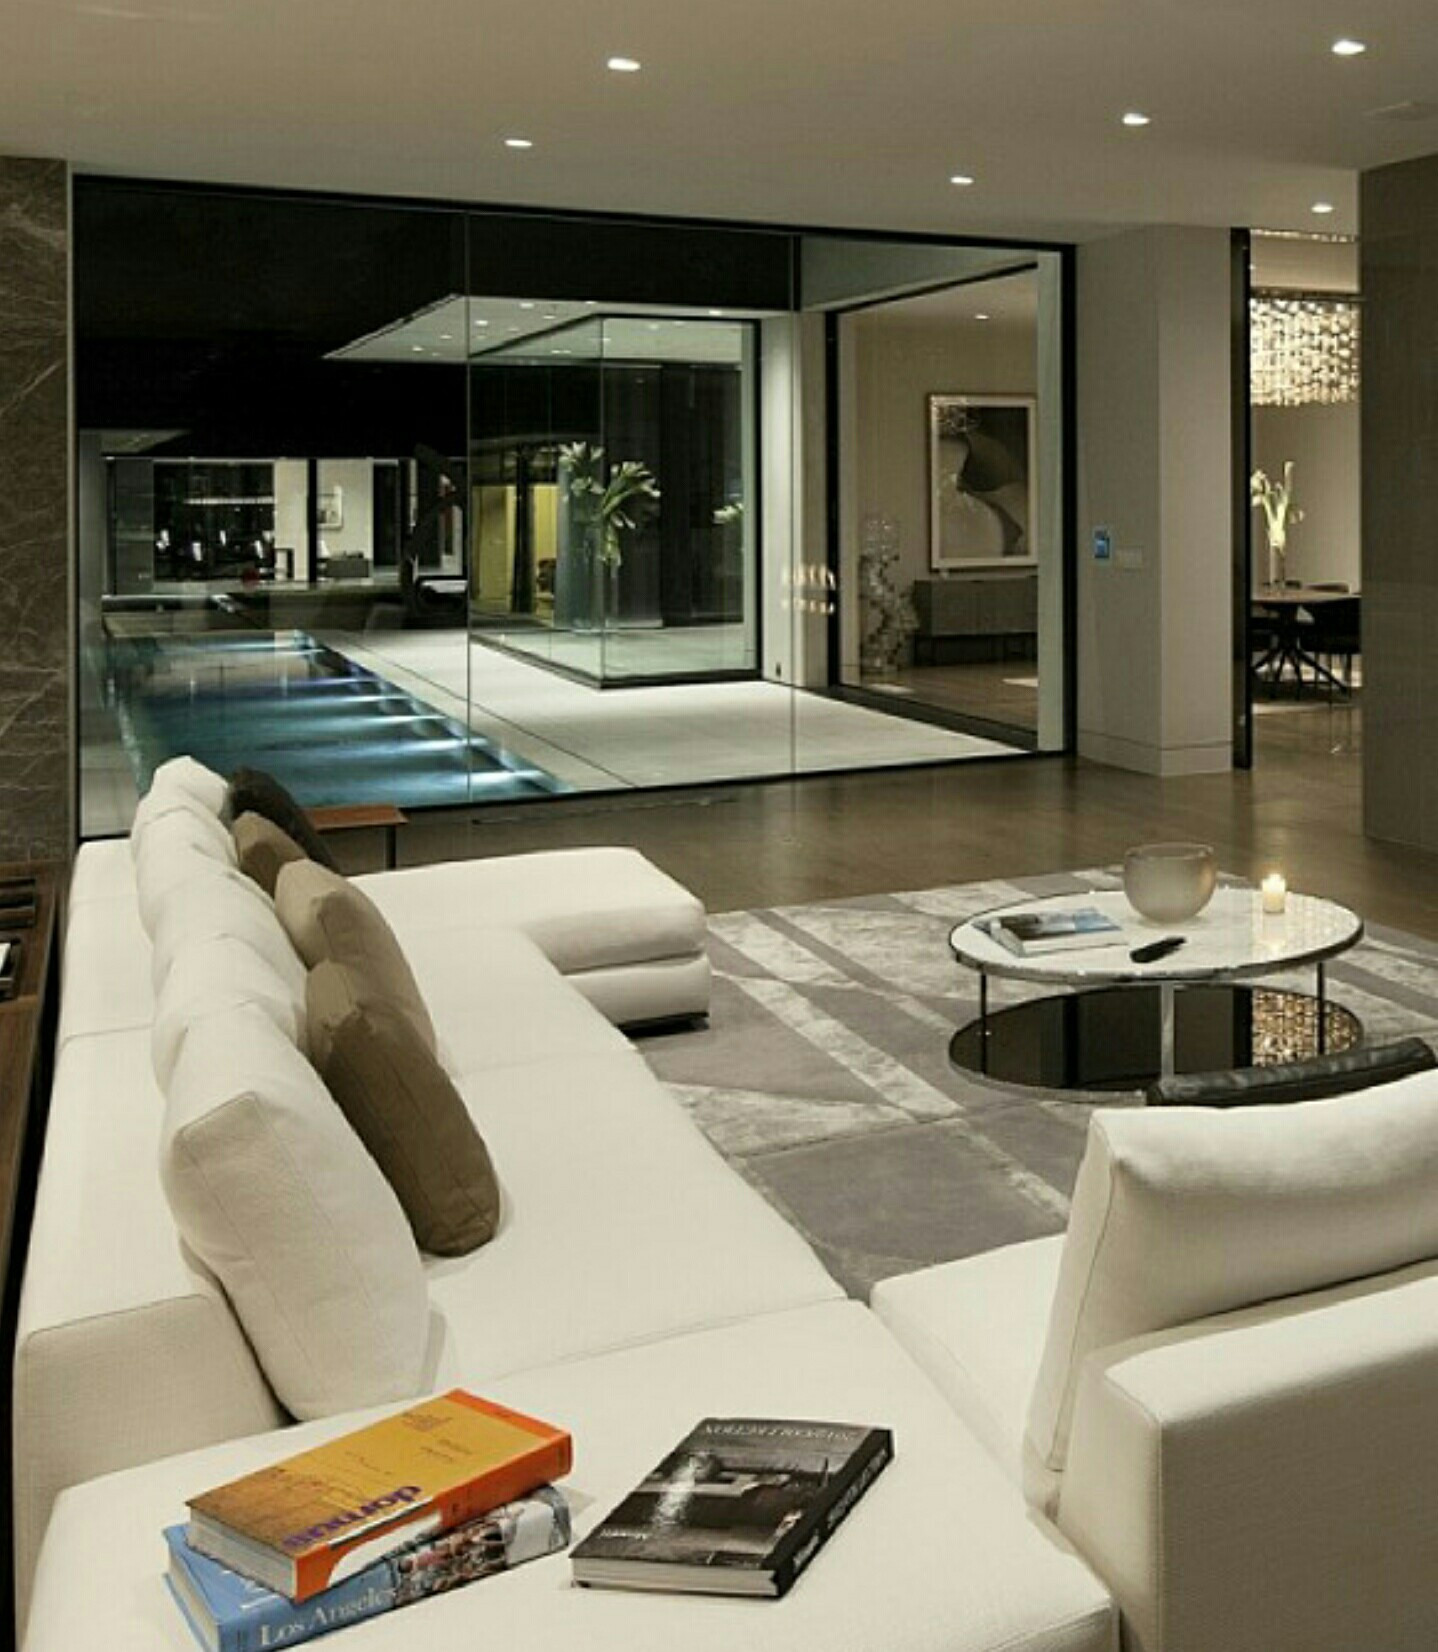 white floor vase with flowers of luxury living room furniture inspirational living room white floor regarding los angeles luxury villa designed by mcclean design architects